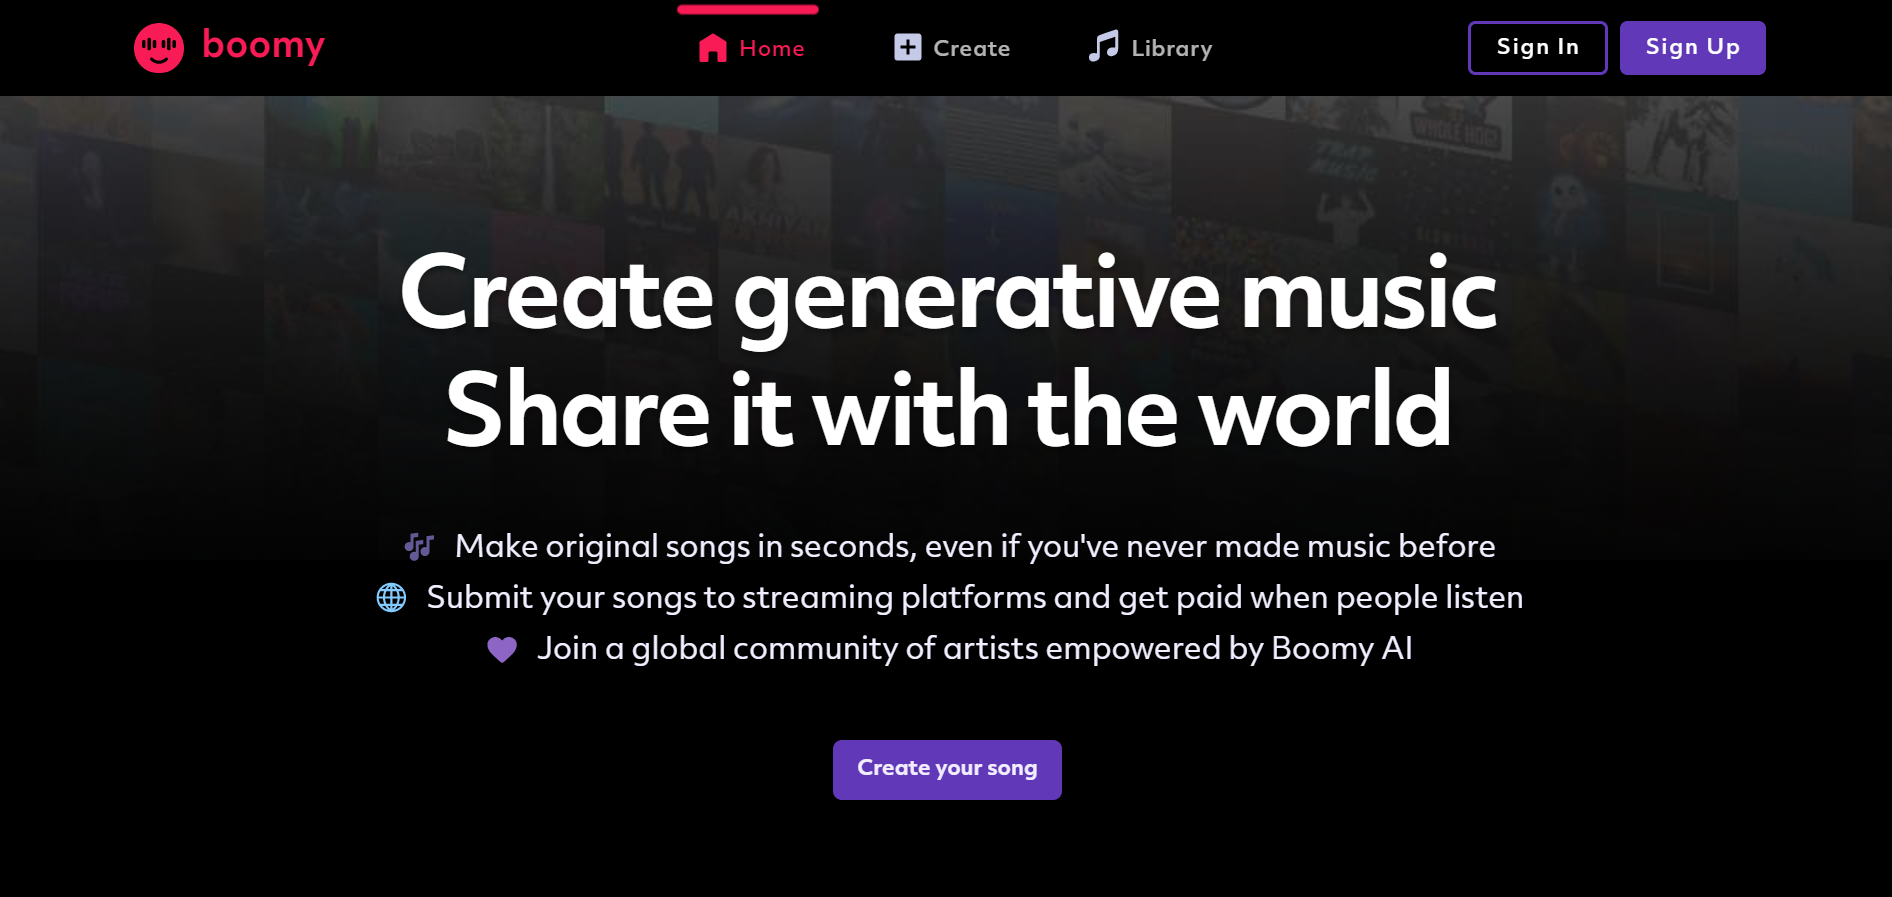 Boomy.com: Create Original Songs and Get Paid for Every Listen!